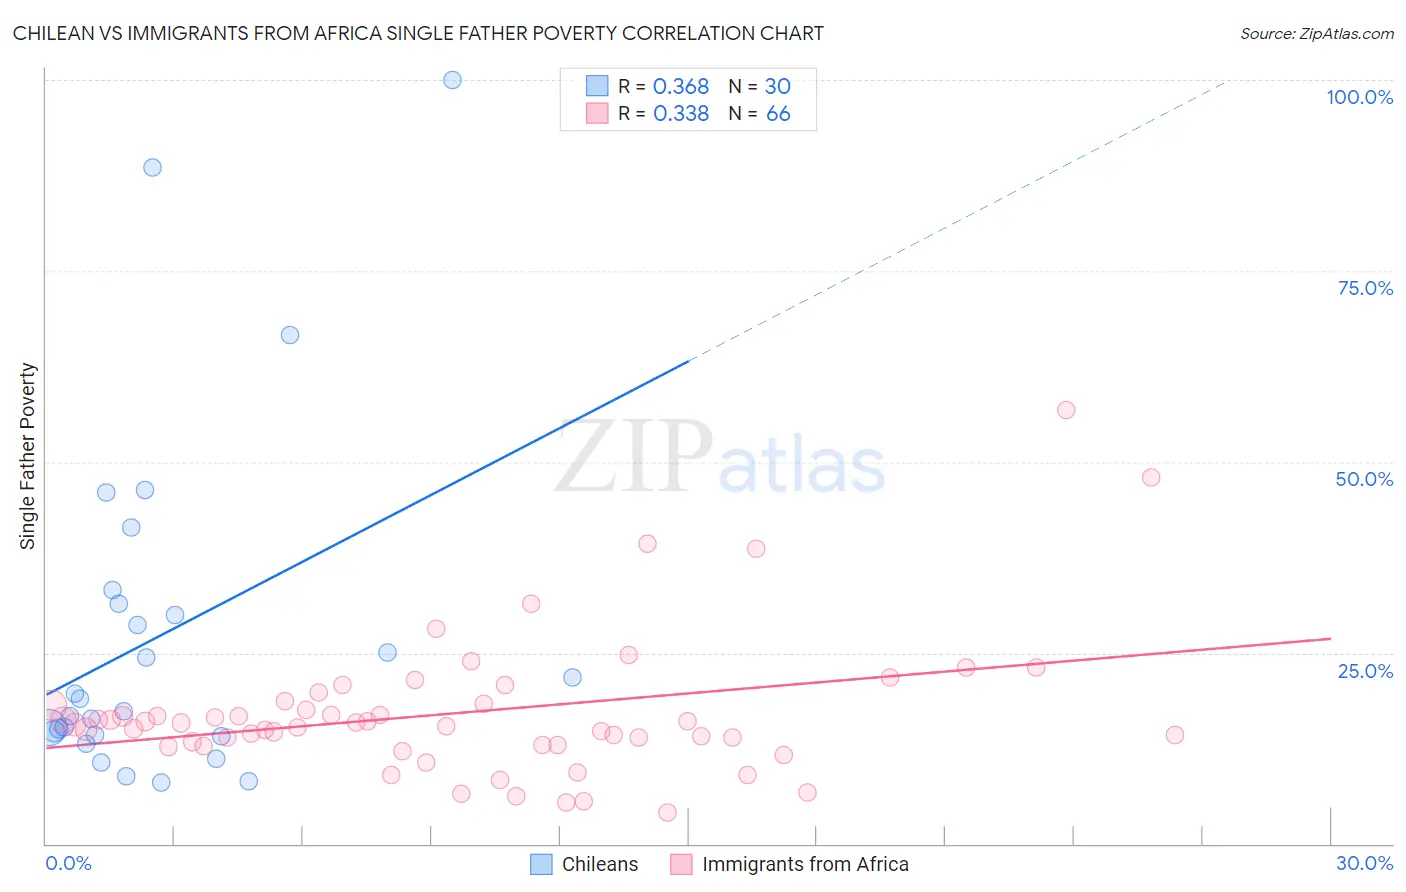 Chilean vs Immigrants from Africa Single Father Poverty